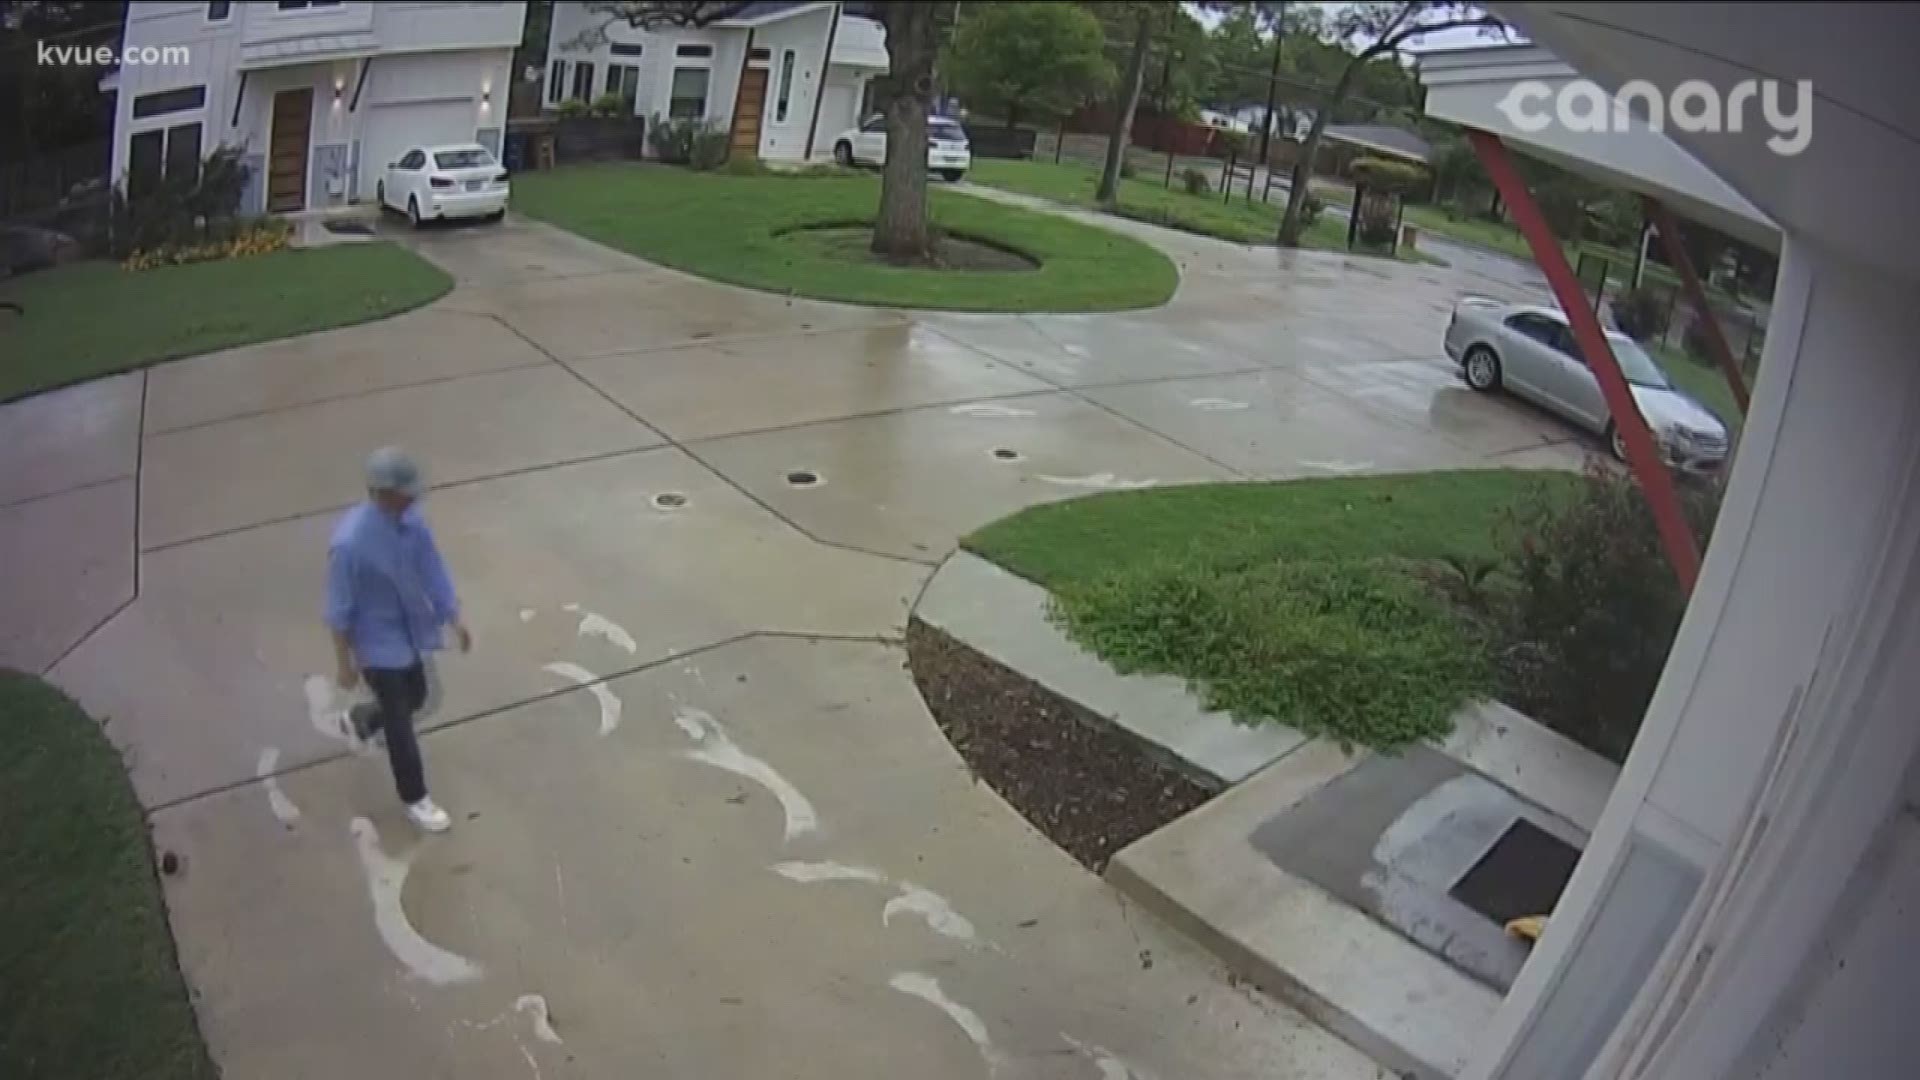 An East Austin neighborhood is trying to get to the bottom of an unusual package theft.